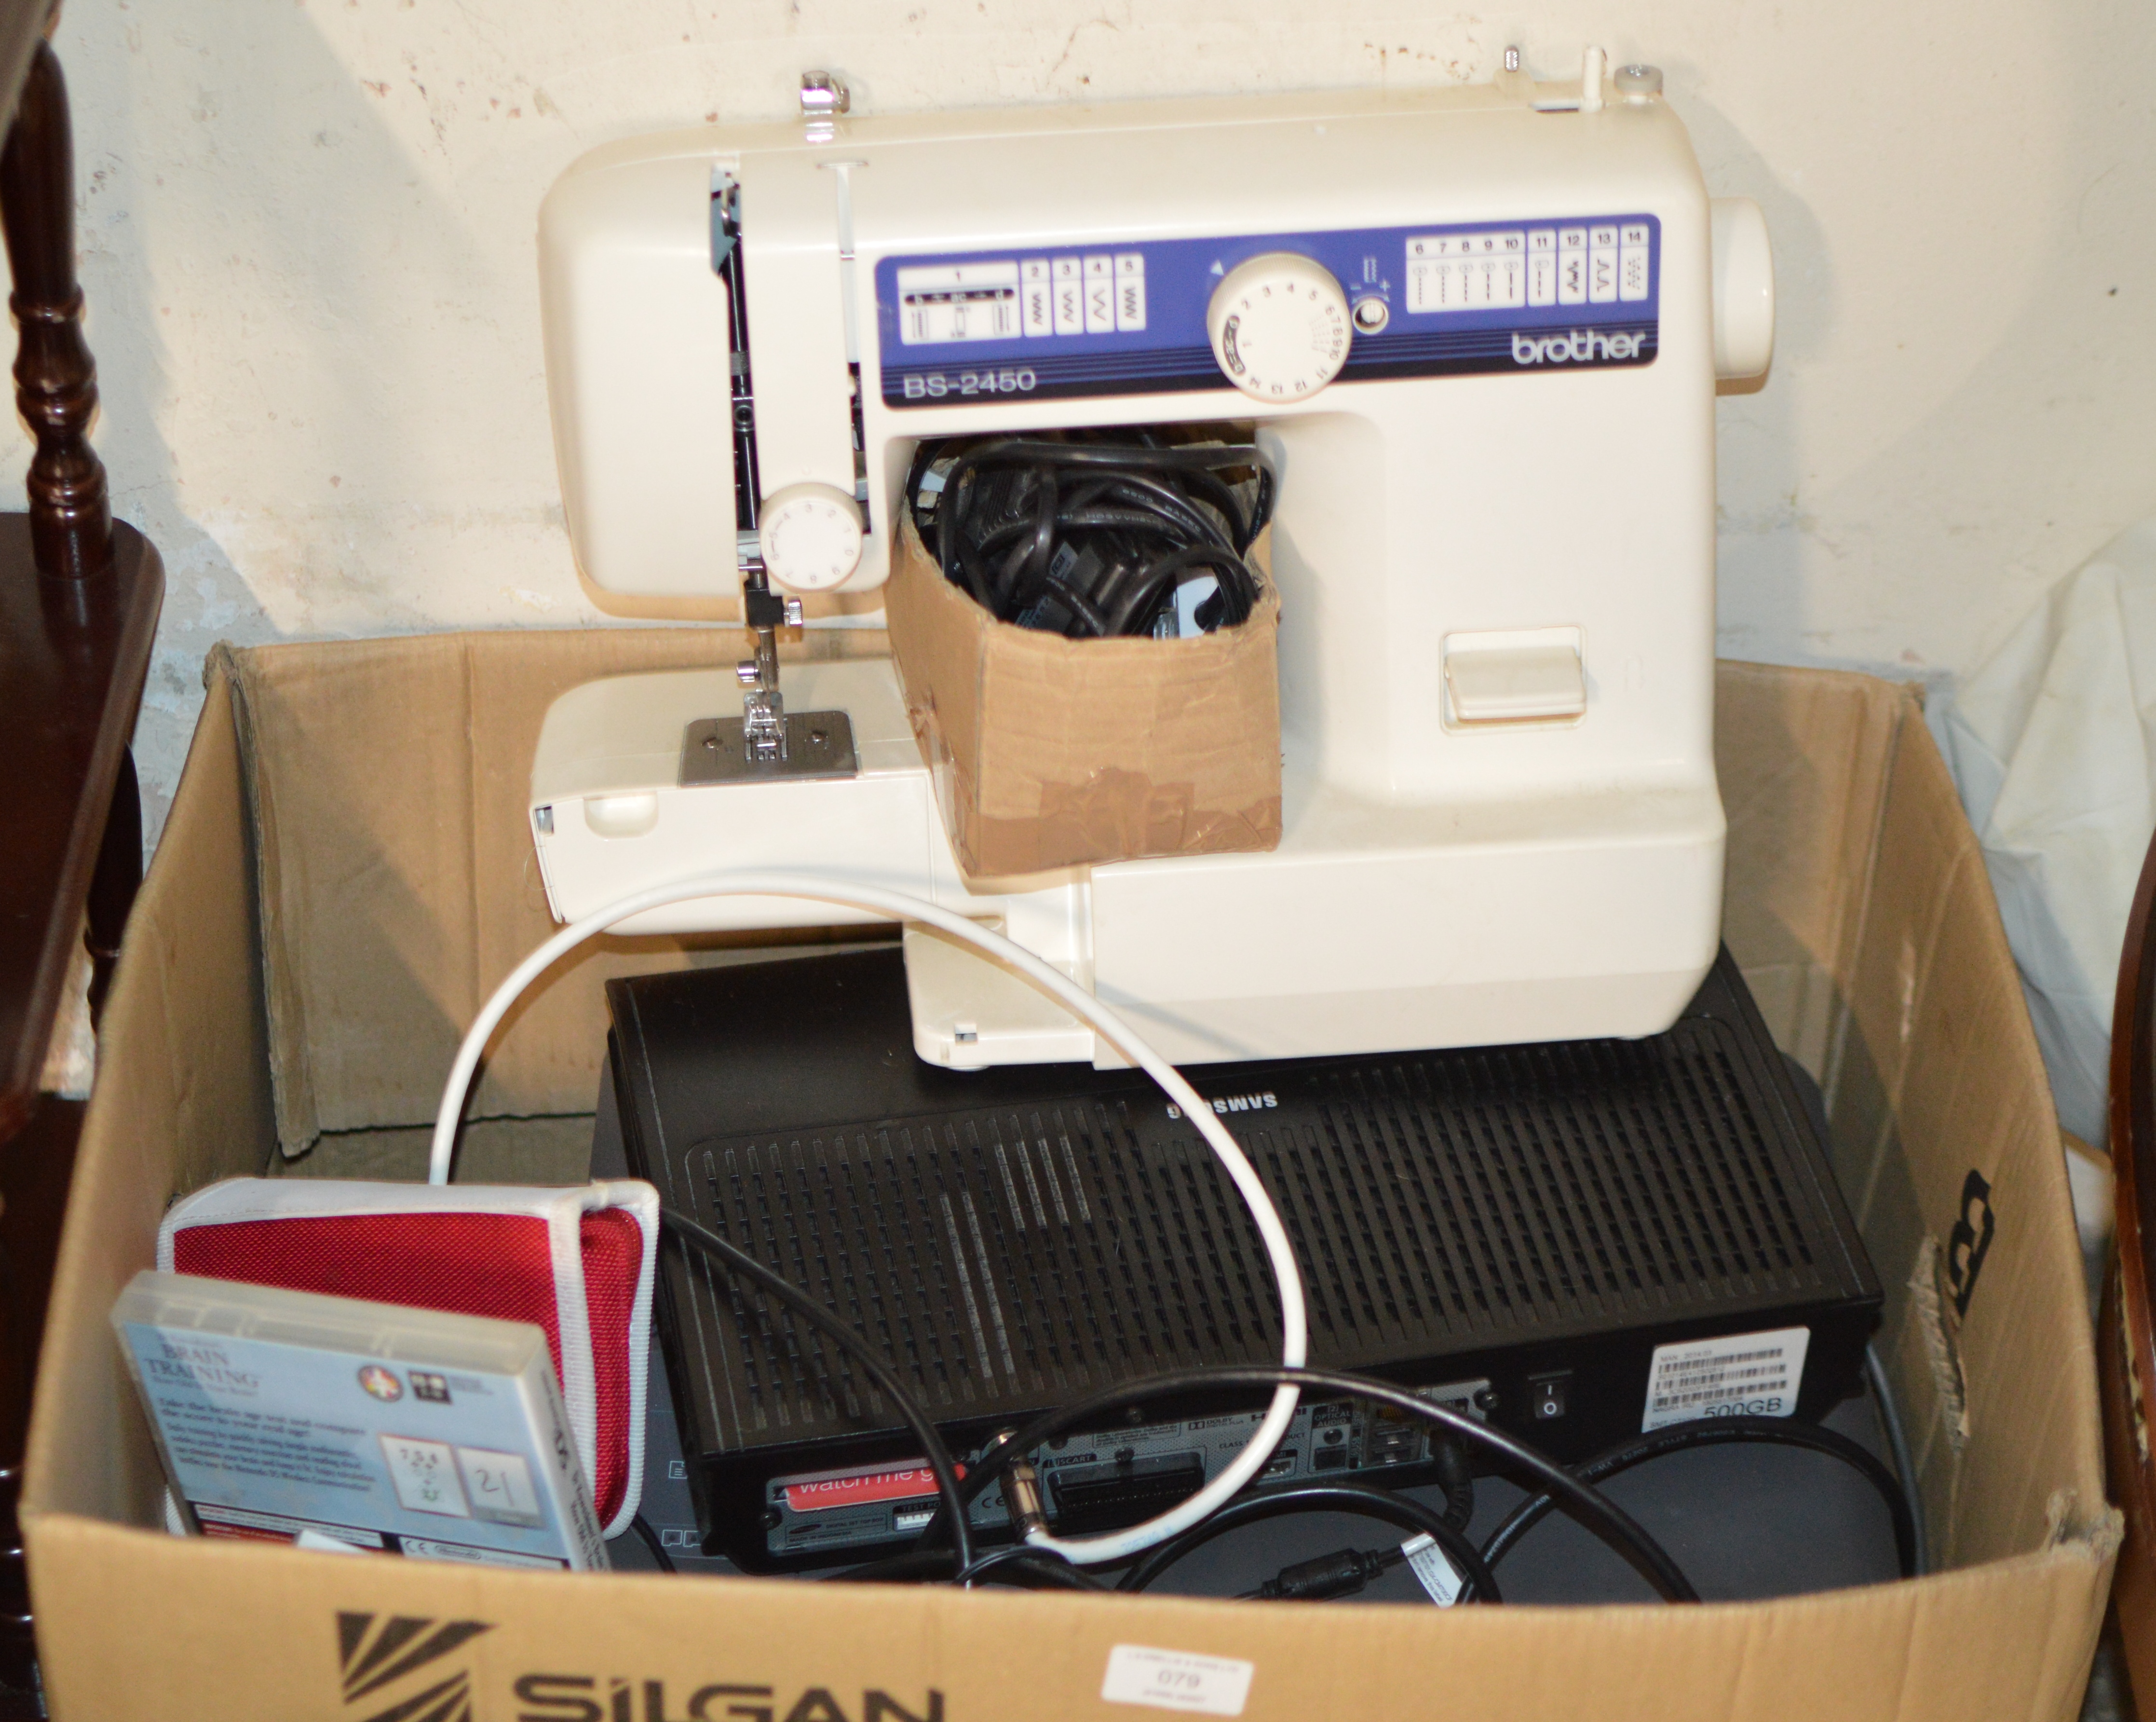 BOX CONTAINING SEWING MACHINE - AS SEEN, VARIOUS DIGI BOXES, NINTENDO DS WITH GAMES ETC